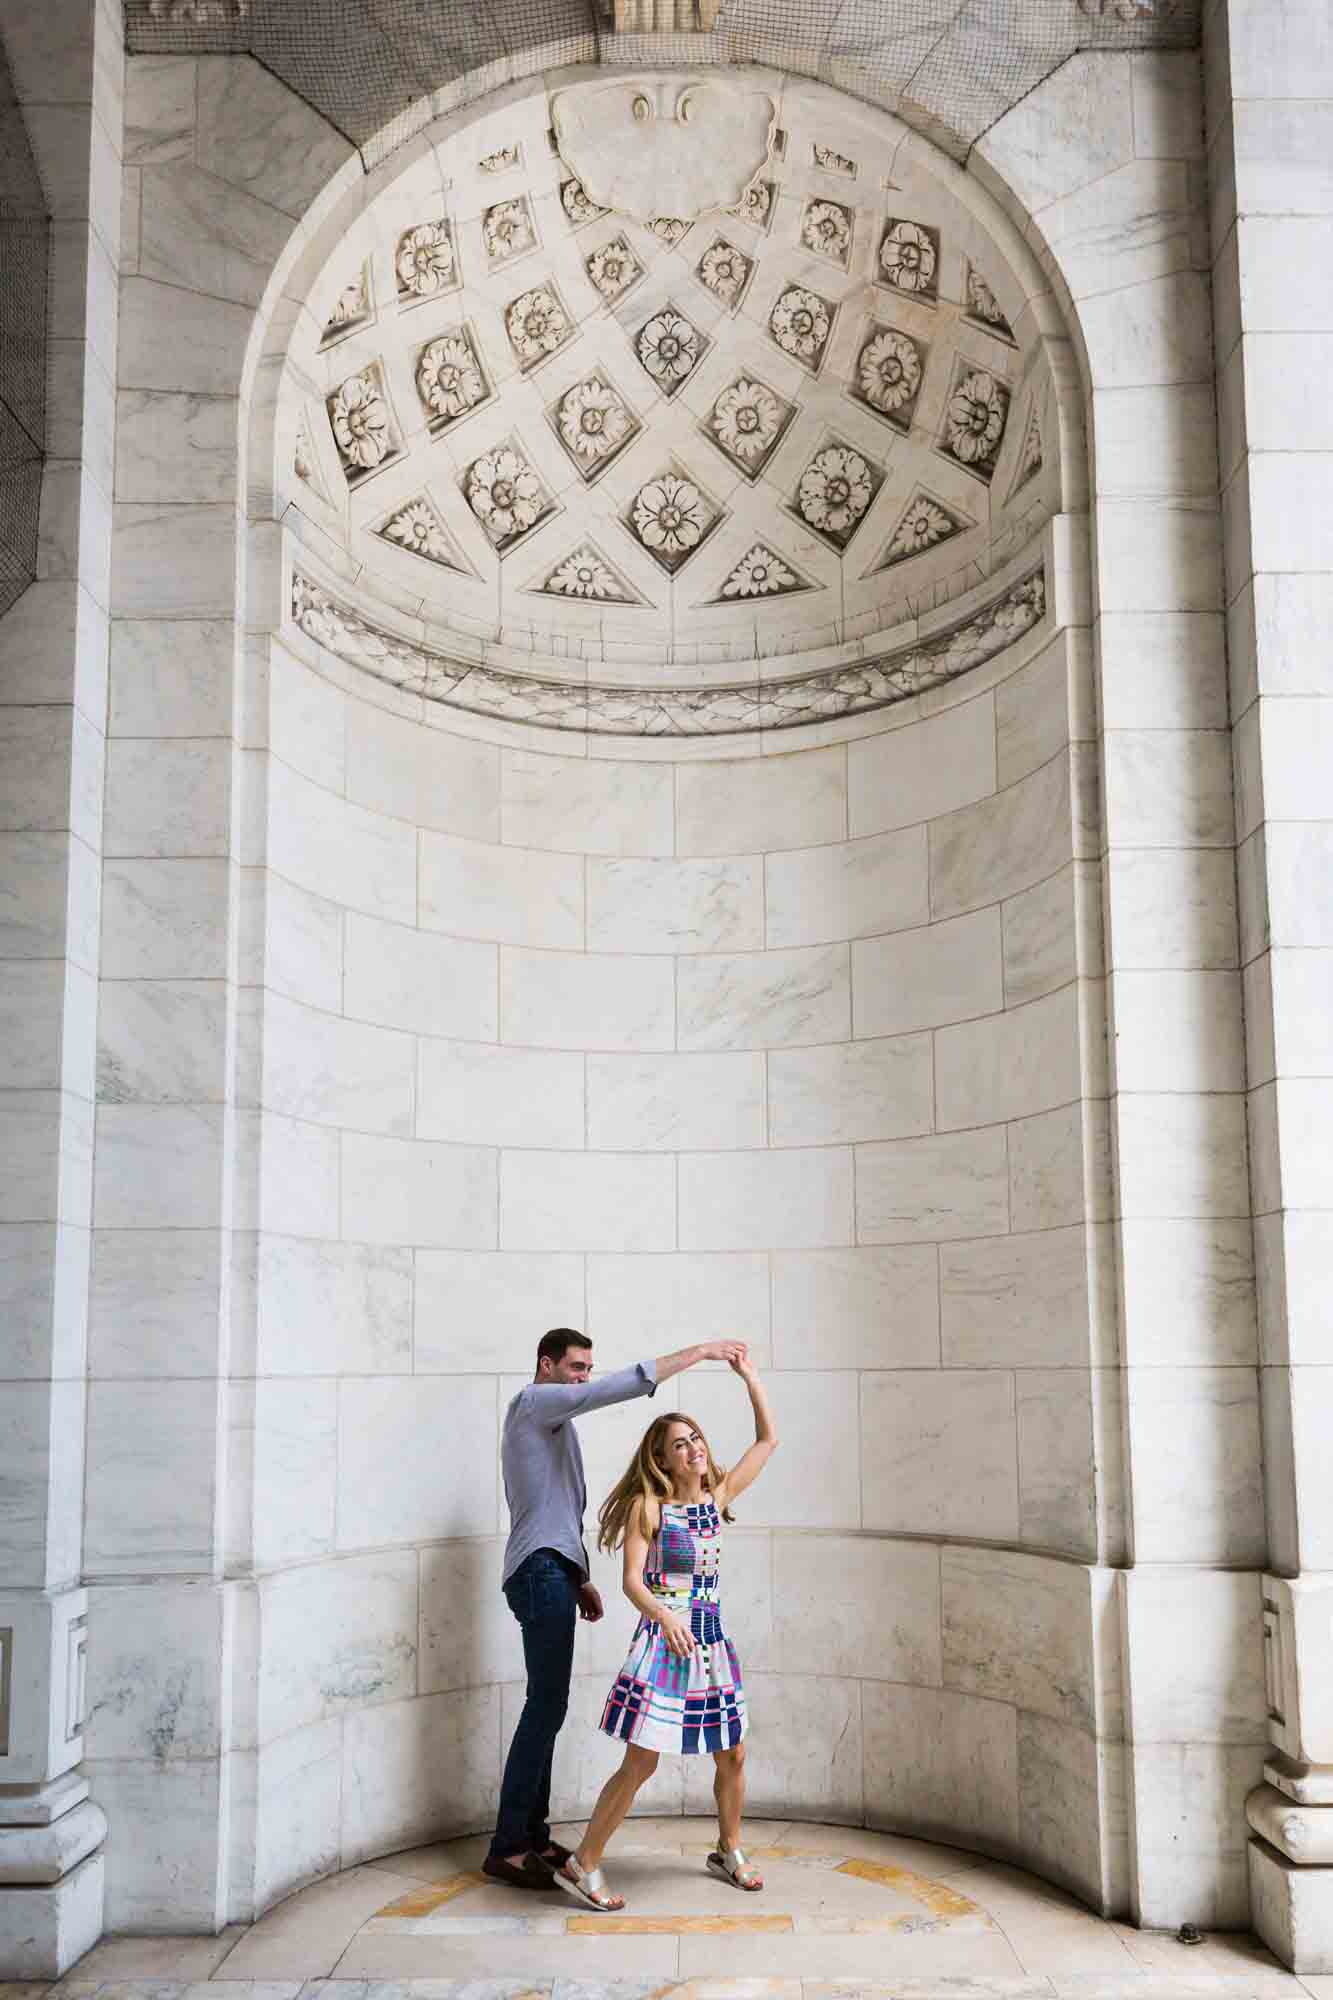 Couple dancing in a marble rotunda during a New York public library engagement photo shoot